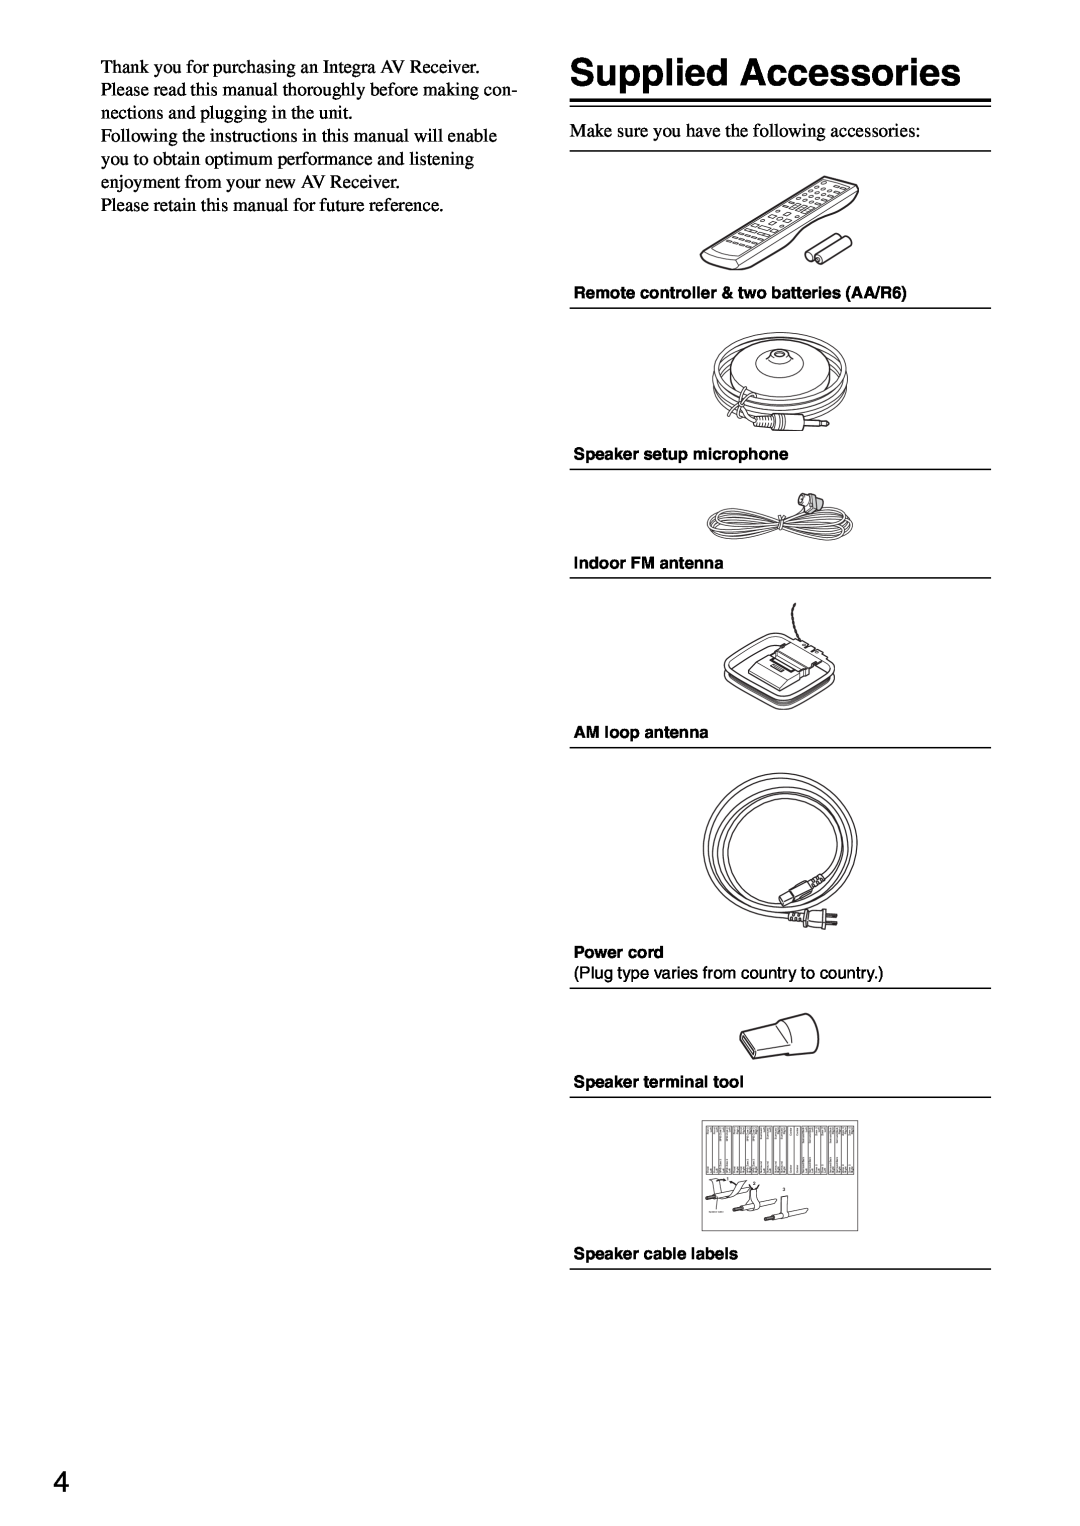 Integra DTR-5.8 instruction manual Supplied Accessories 